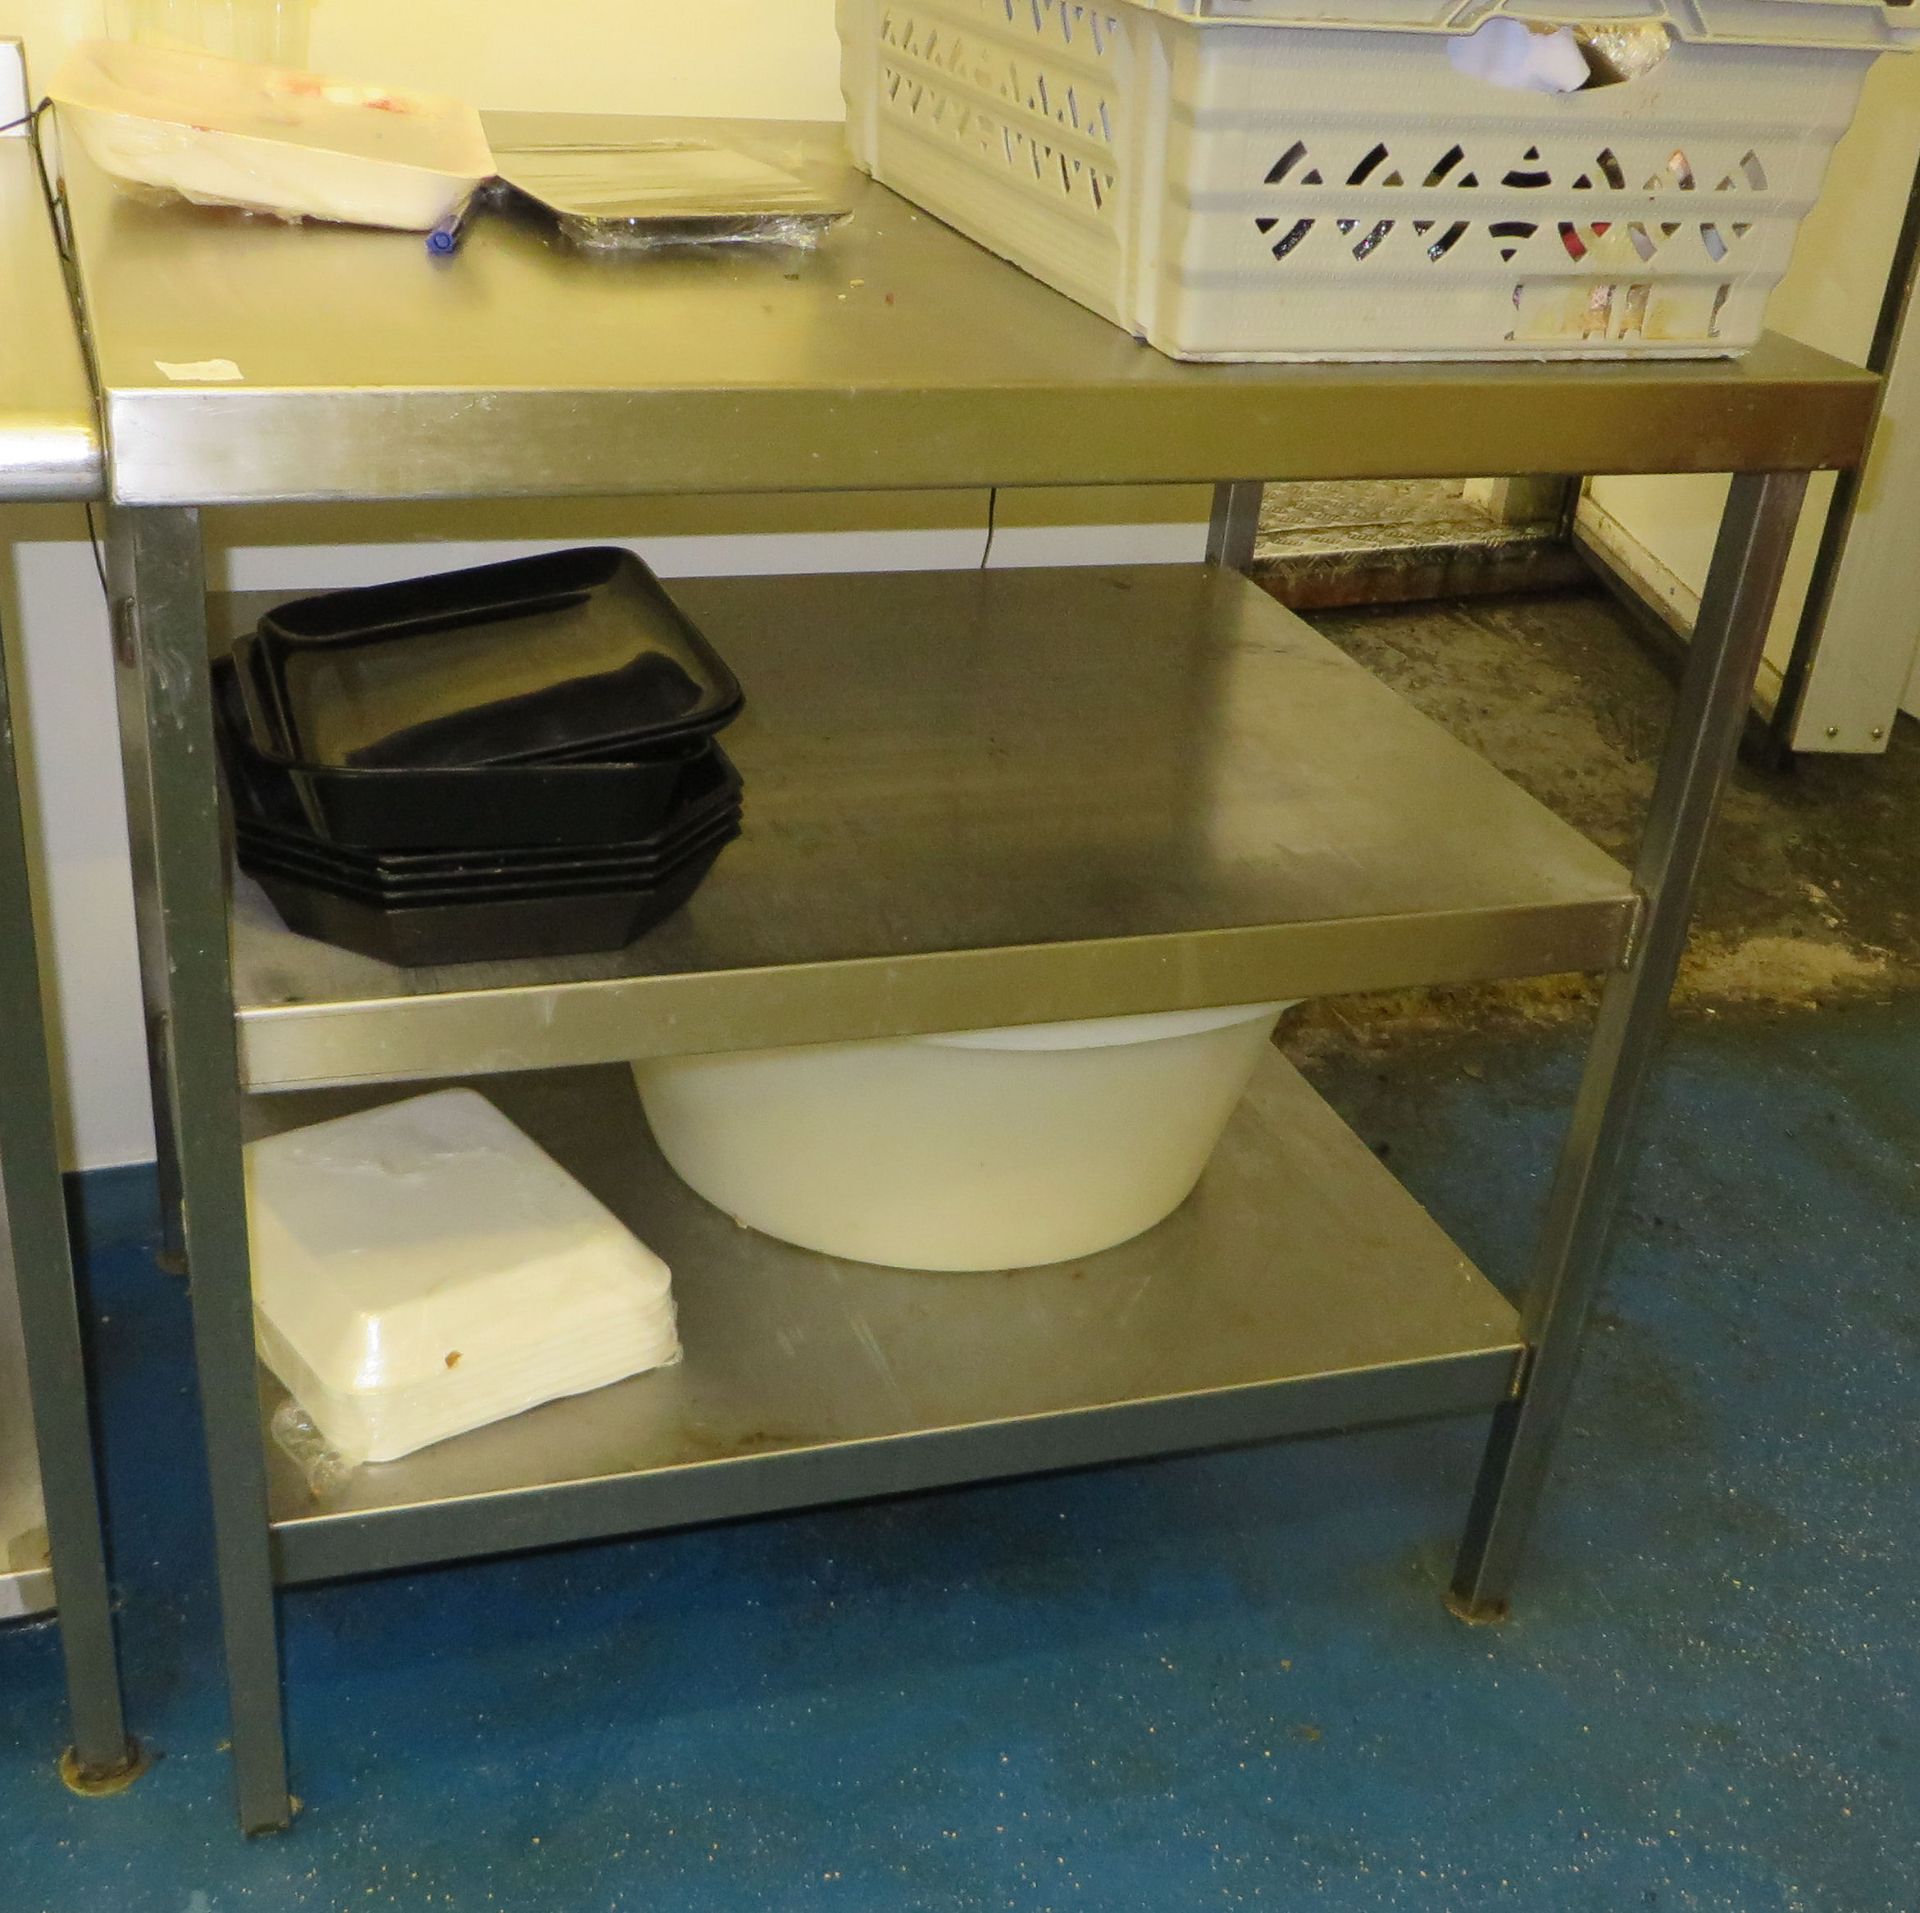 1 x Stainless Steel Preparation Table - Ref: 026 - CL173 - Location: Altrincham WA15Dimensio - Image 2 of 3